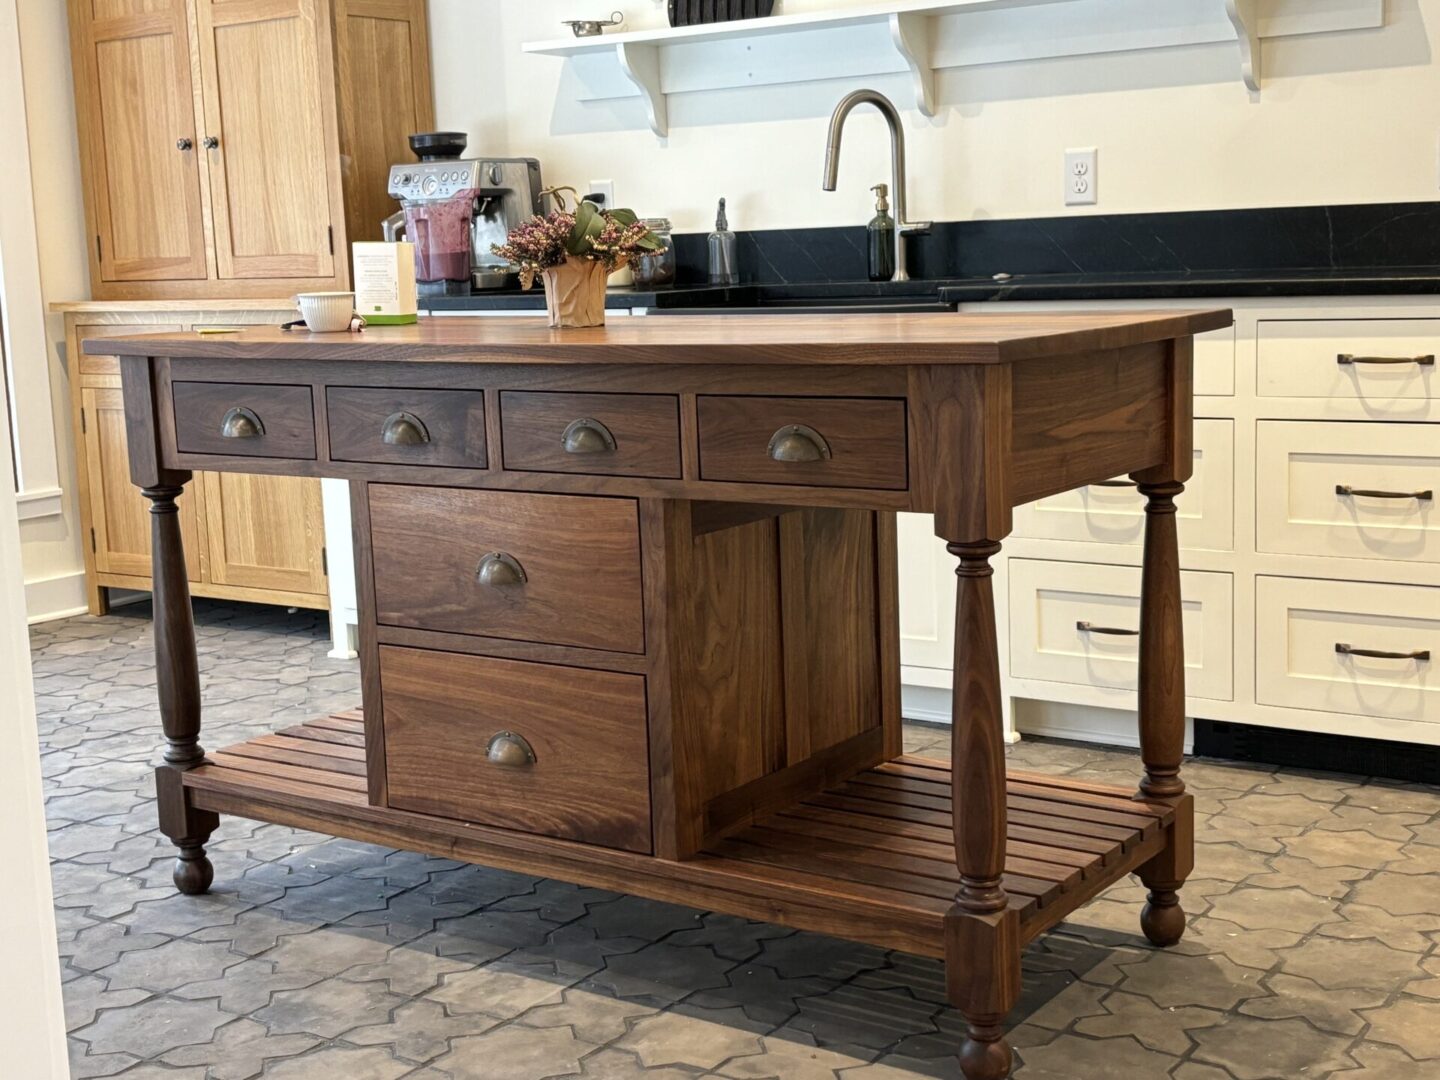 A kitchen island with drawers and a sink.